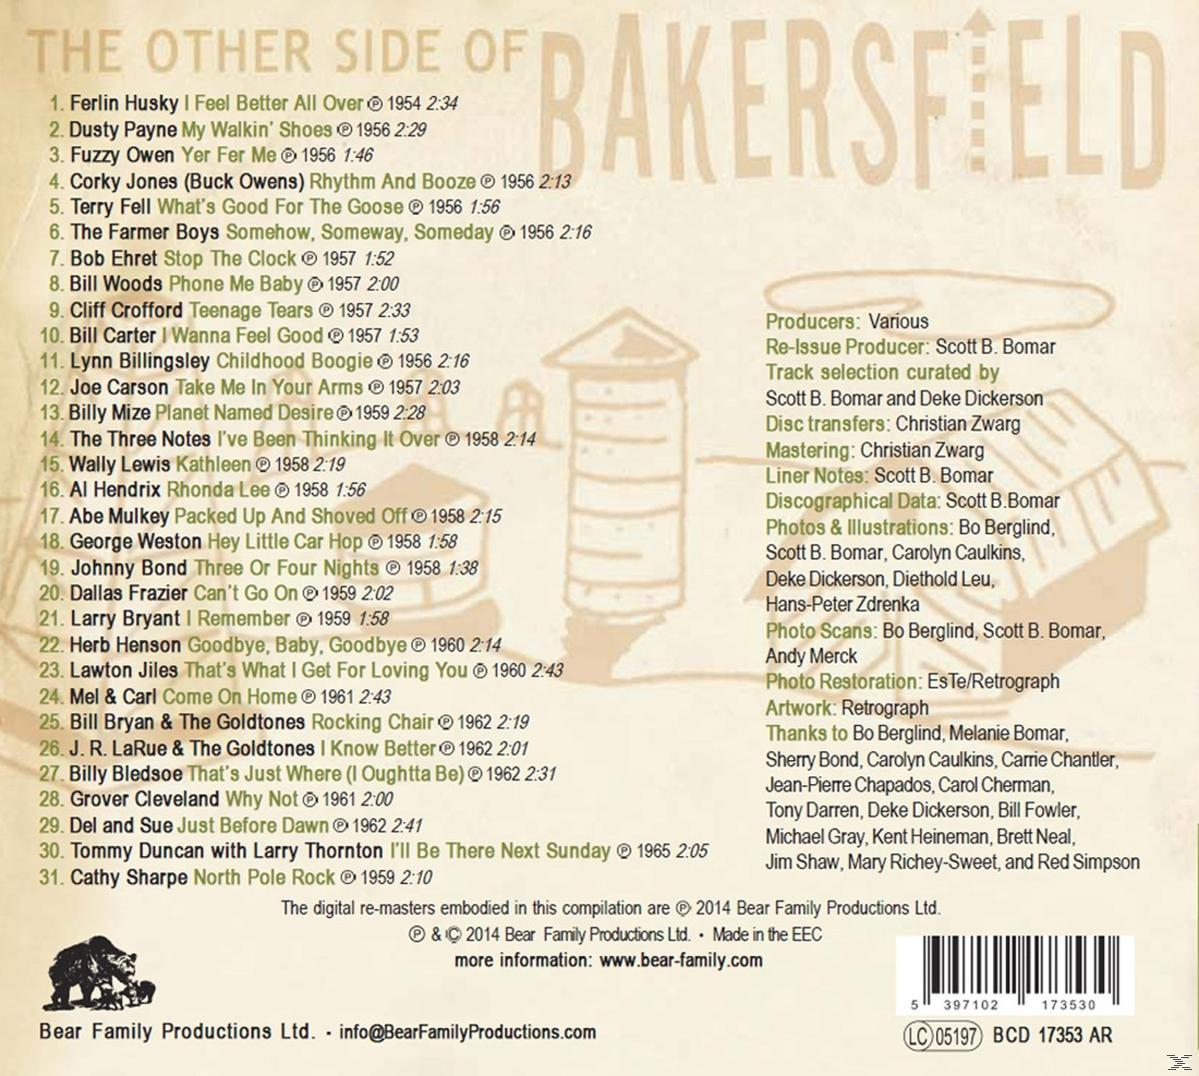 VARIOUS Bakersfield, - - The (CD) Side Vol.2 Of Other